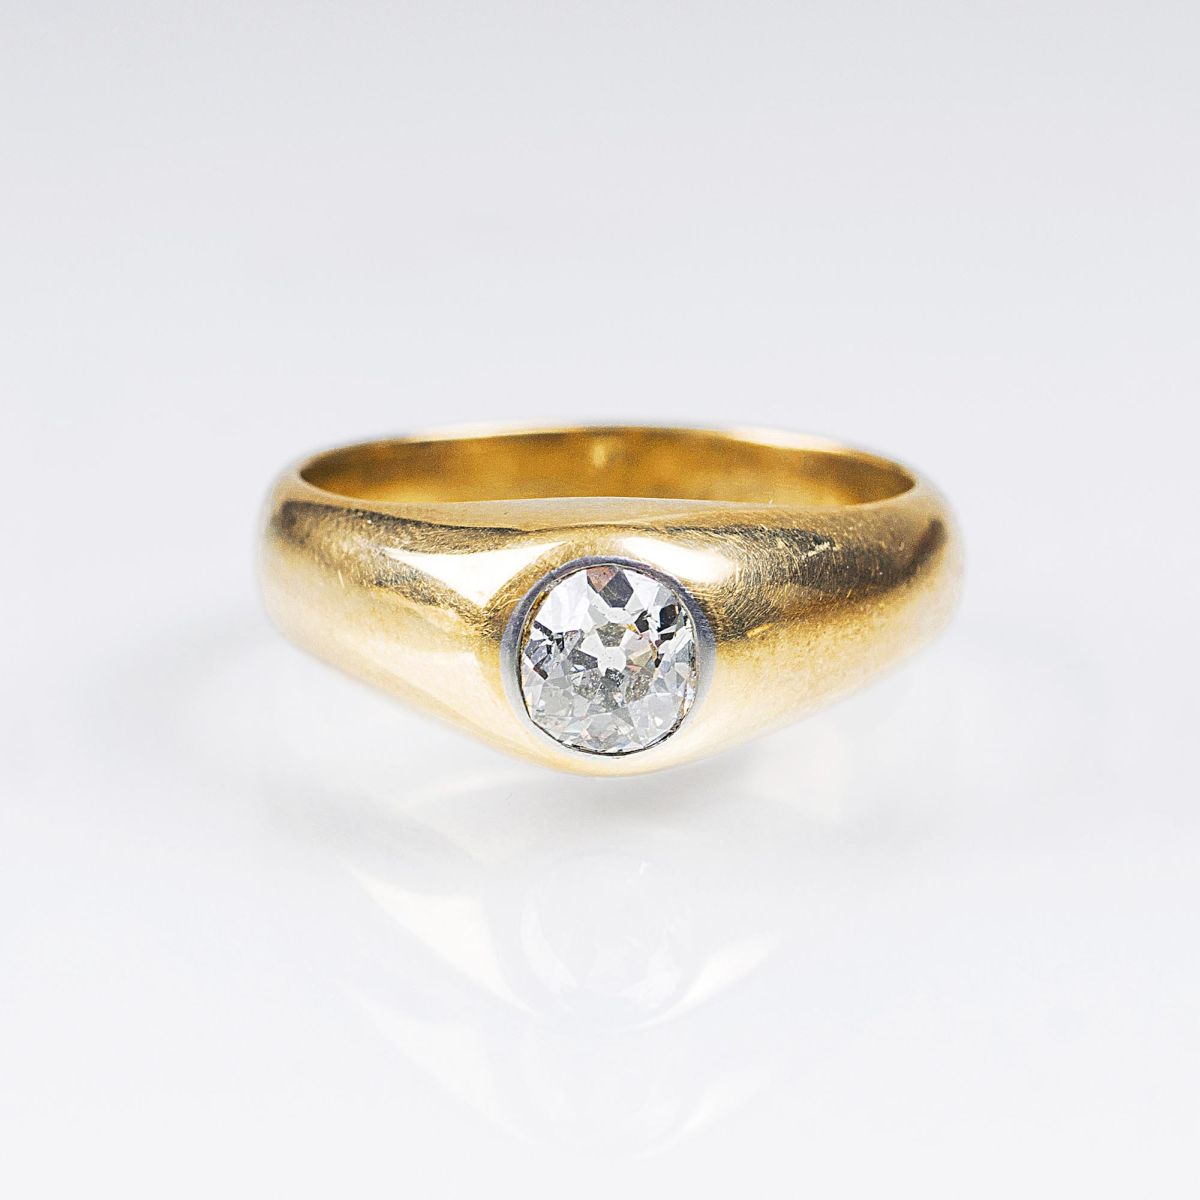 An Old Cut Diamond Solitaire Ring for Gentlemen